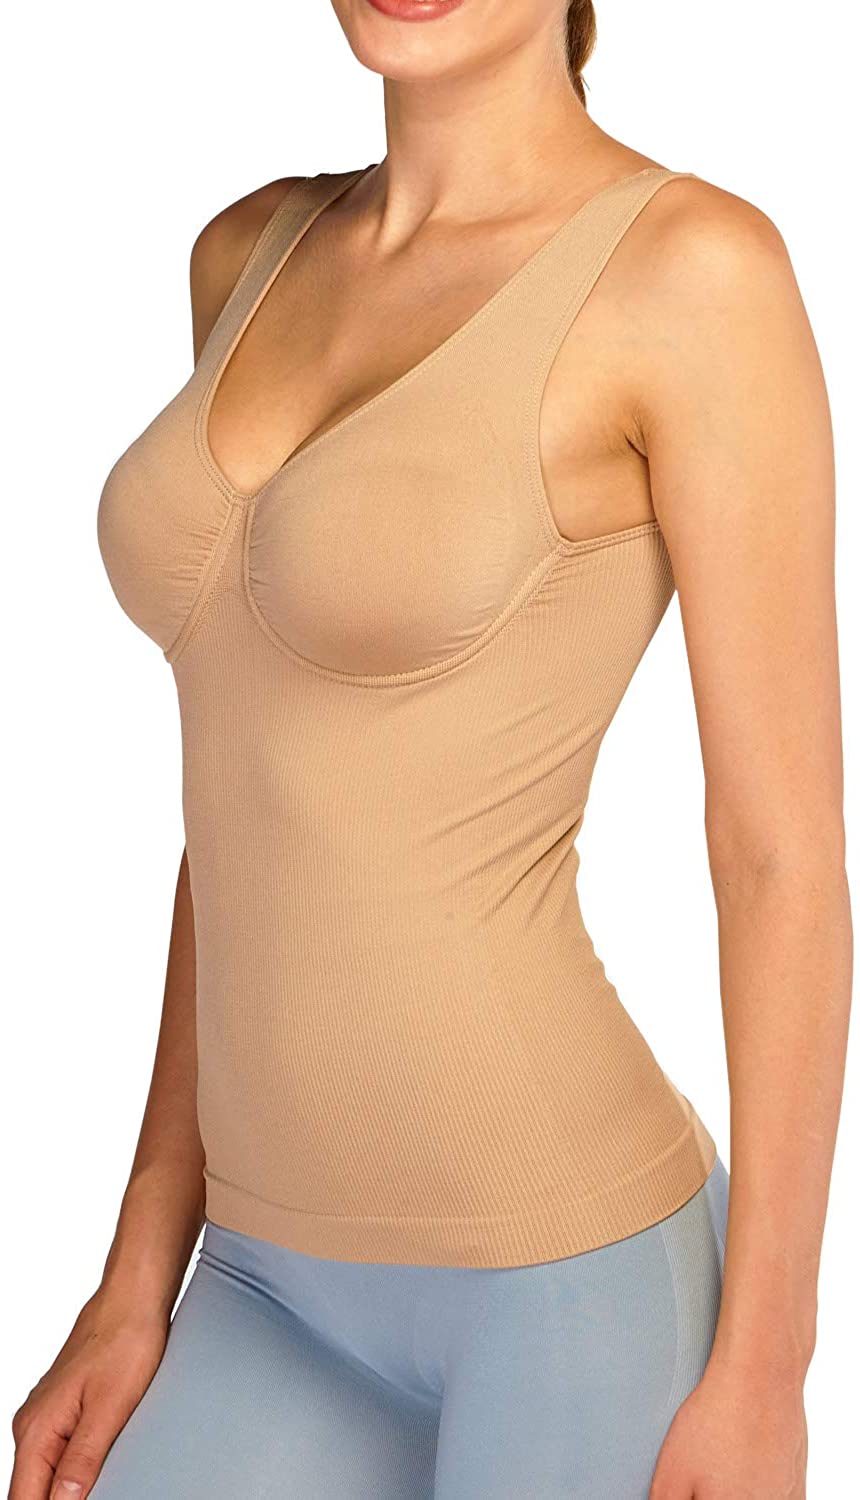 Price:$12.48 Beilini Women's Tummy Control Shapewear Tank Tops Seamless Body Shaper Compression Top with Underwire Molded Cups at Amazon Women’s Clothing store